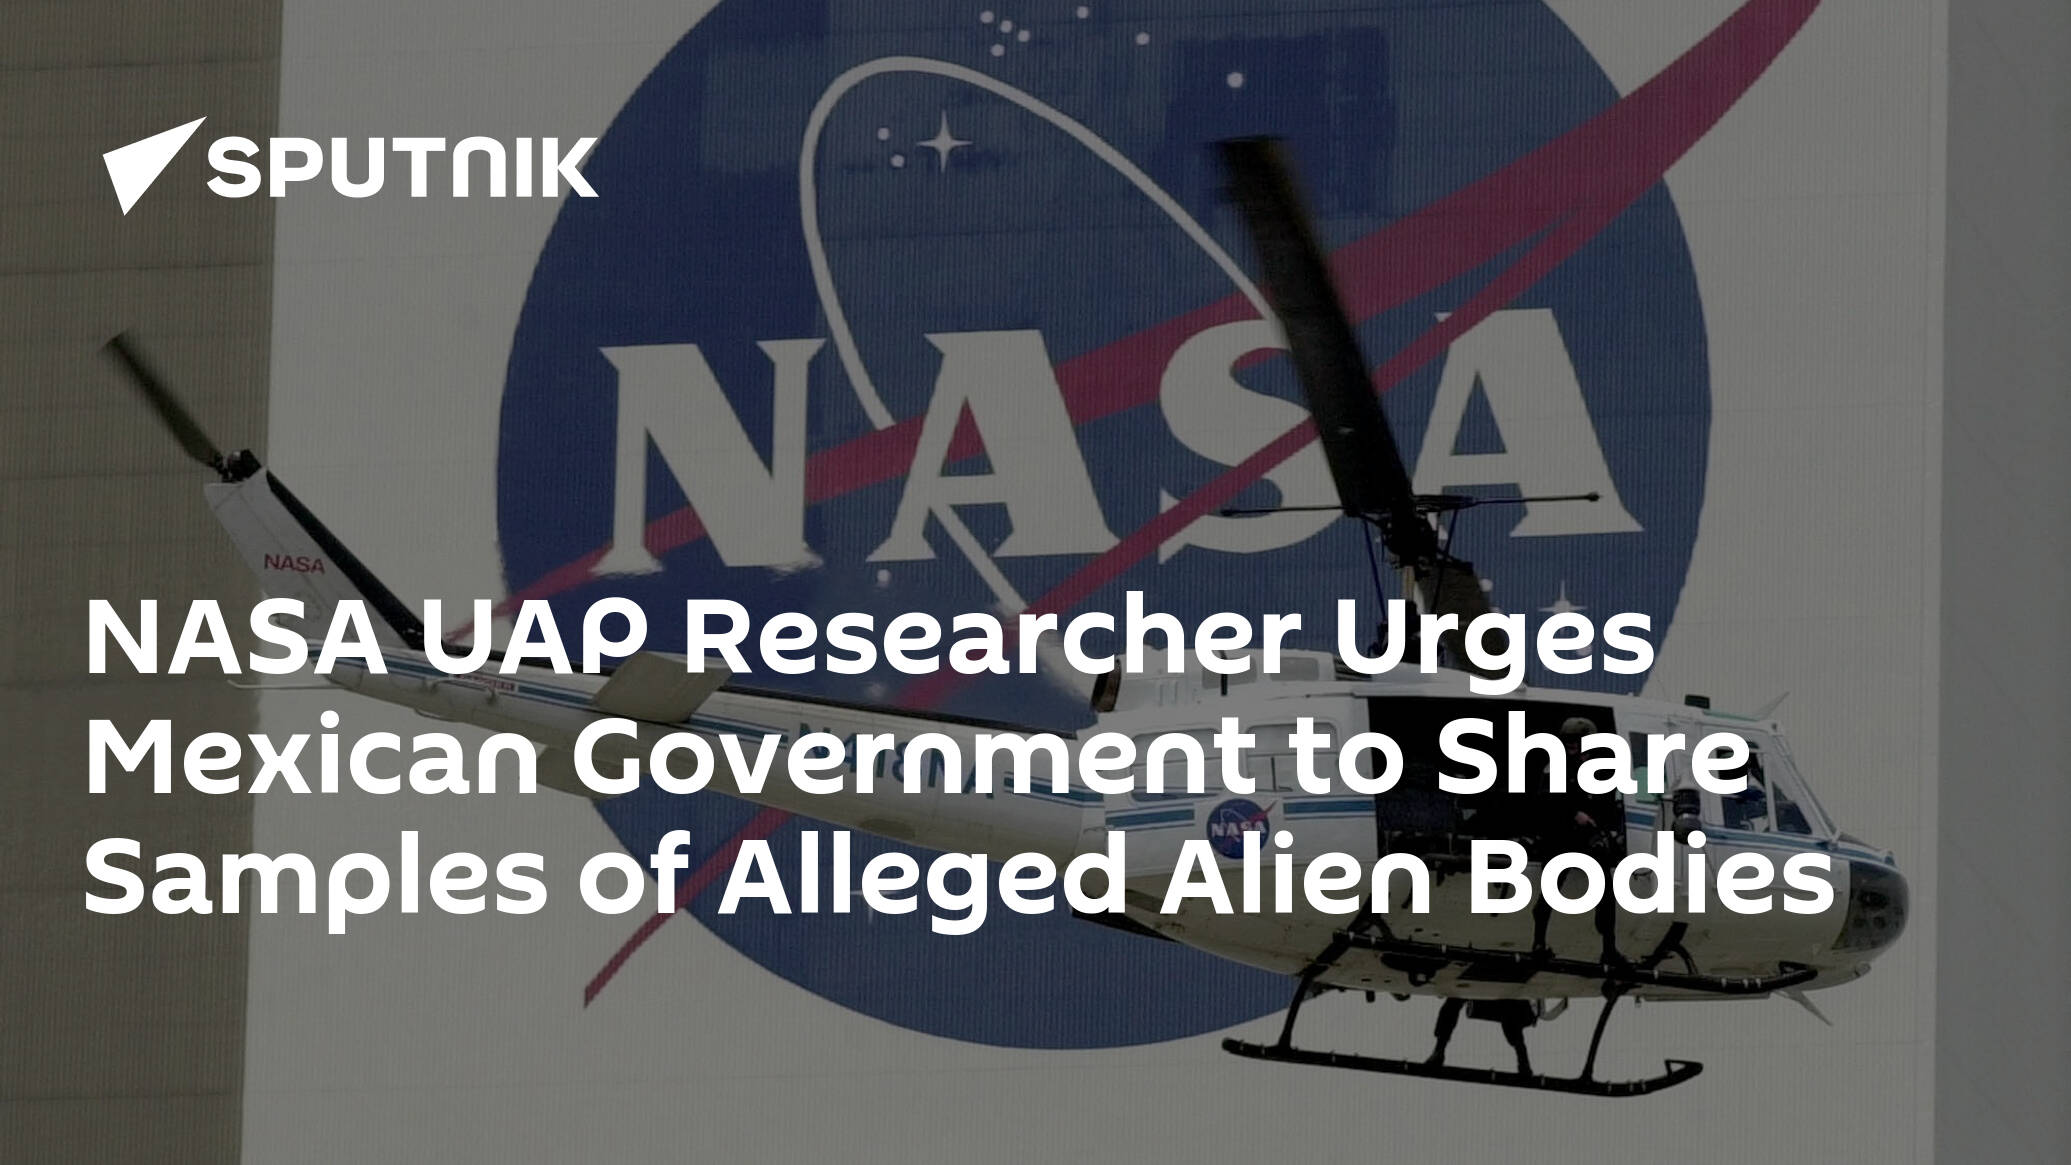 NASA UAP Researcher Urges Mexican Government to Share Samples of Alleged Alien Bodies